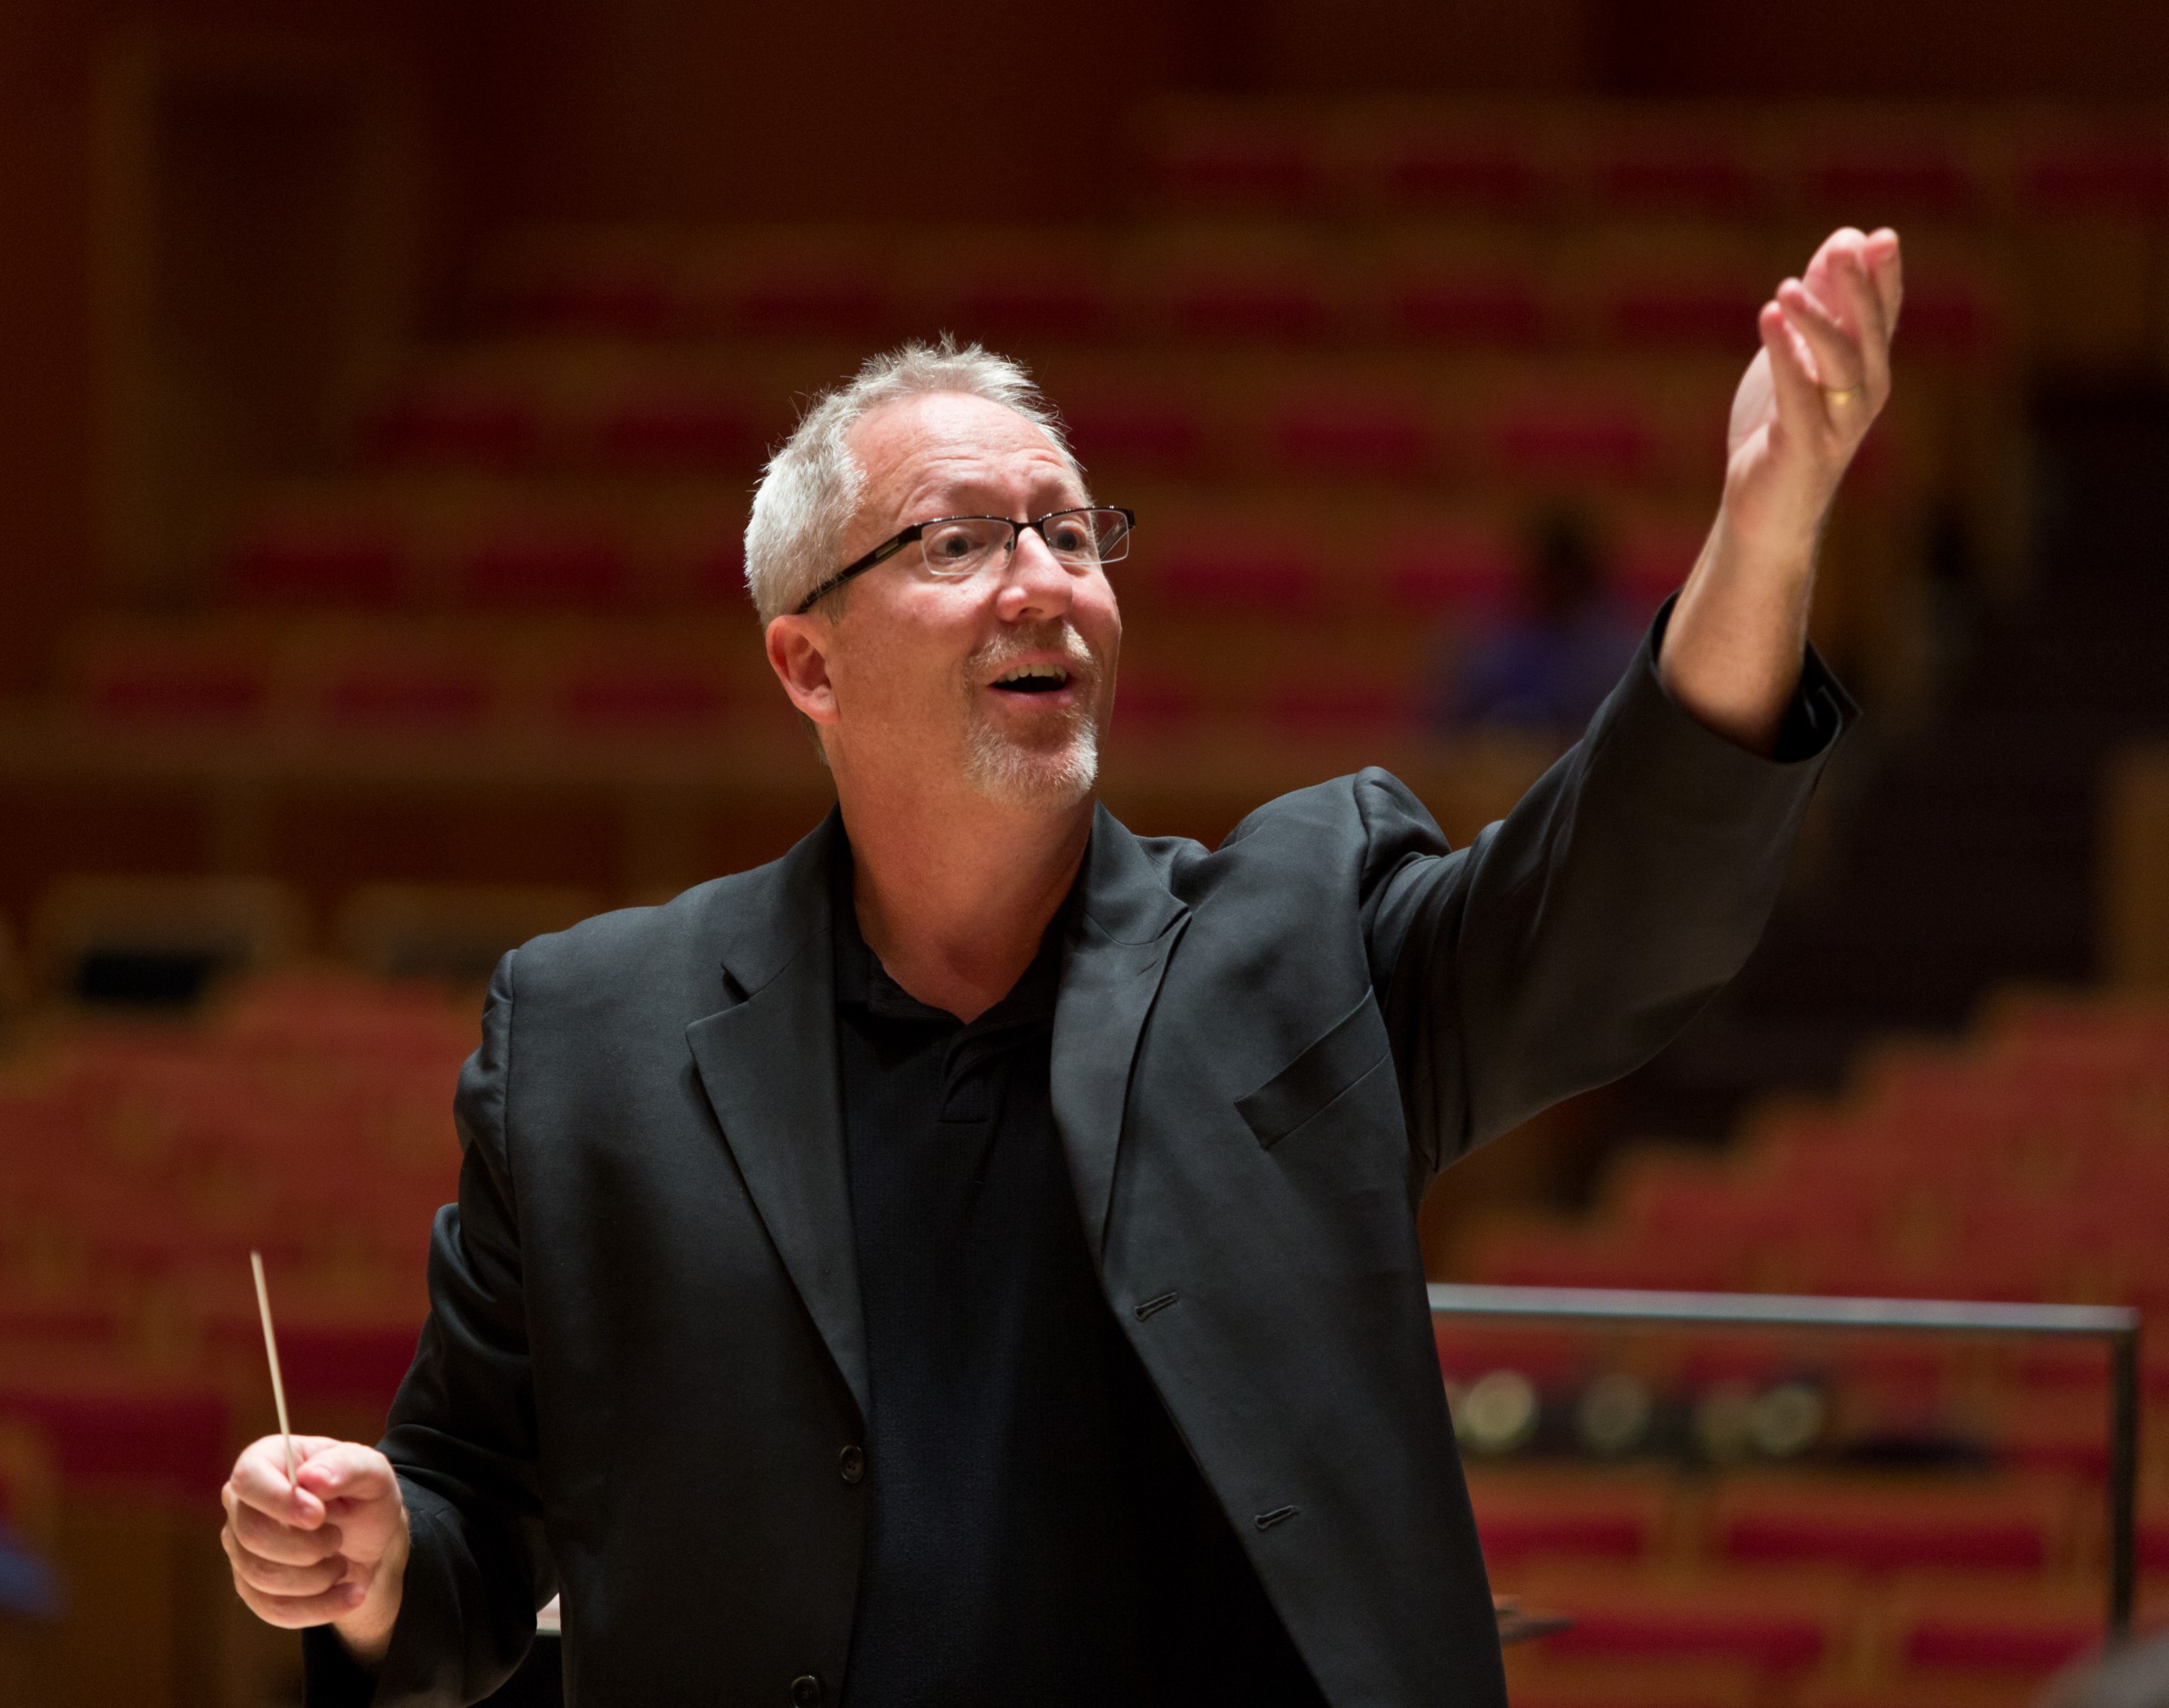 Ed Powell directing the PLU Wind Ensemble on Wednesday, Sept. 18, 2013. (Photo/John Froschauer)